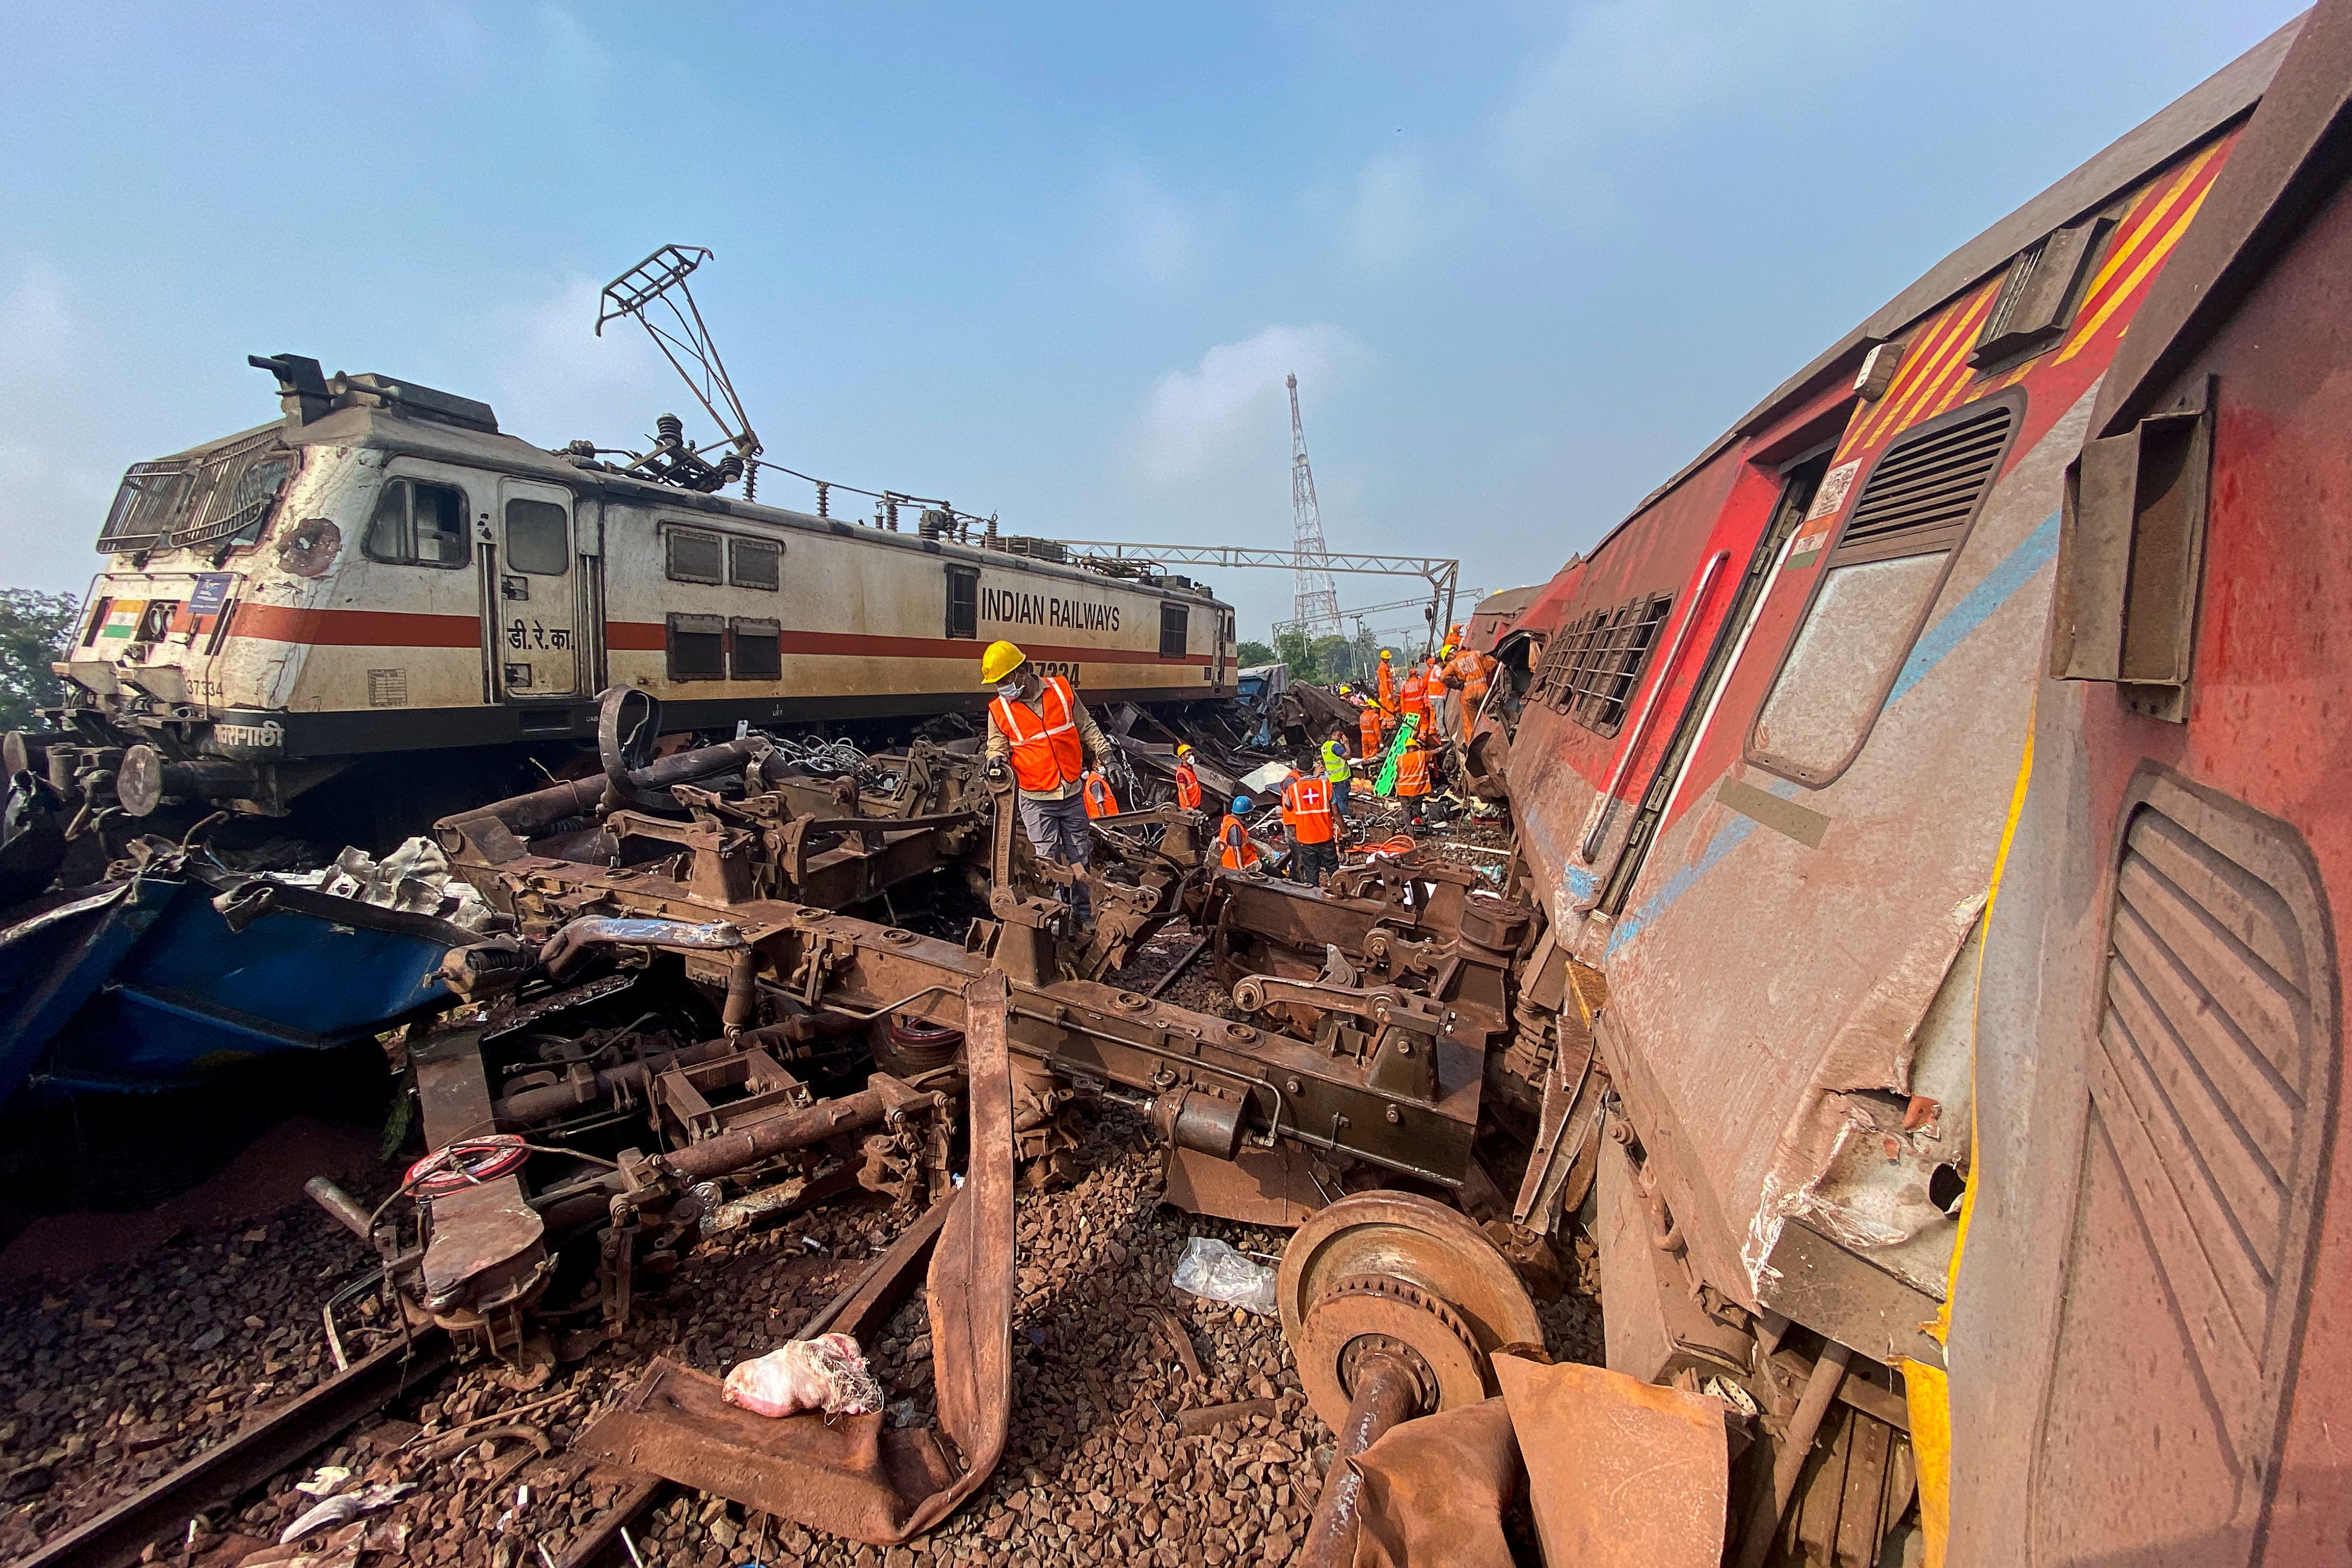 Odisha train accident today: Modi says Odisha guilty will be 'punished stringently' as families identify bodies | The Independent